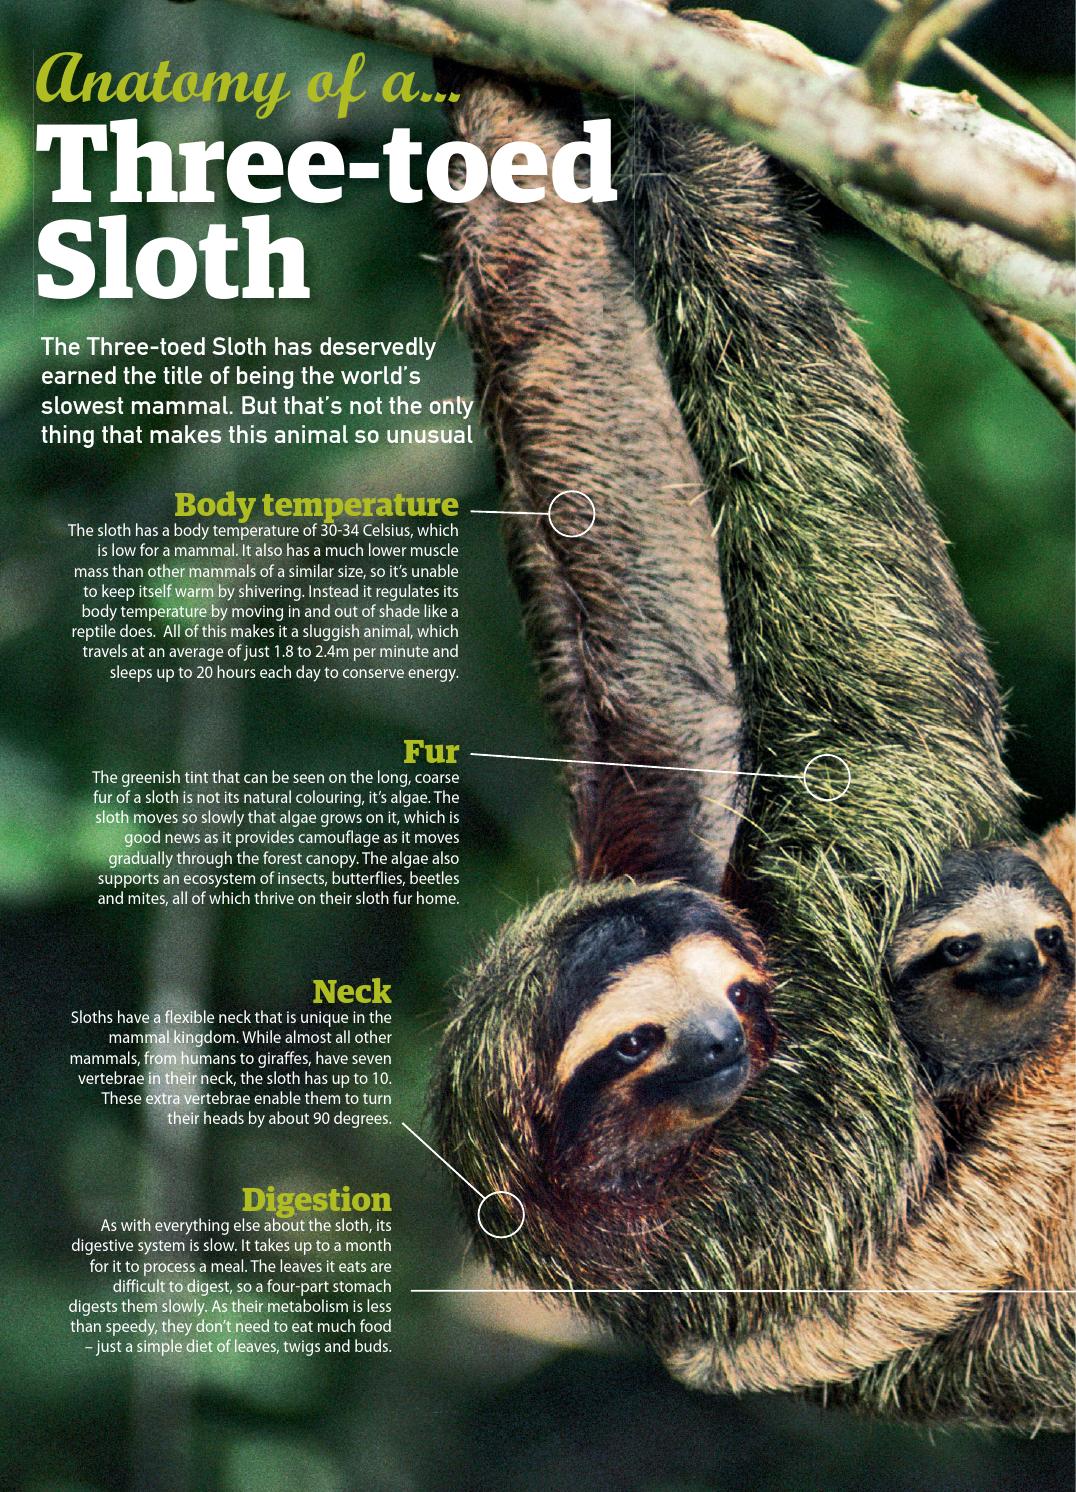 How is the digestion process of a sloth different from other mammals?